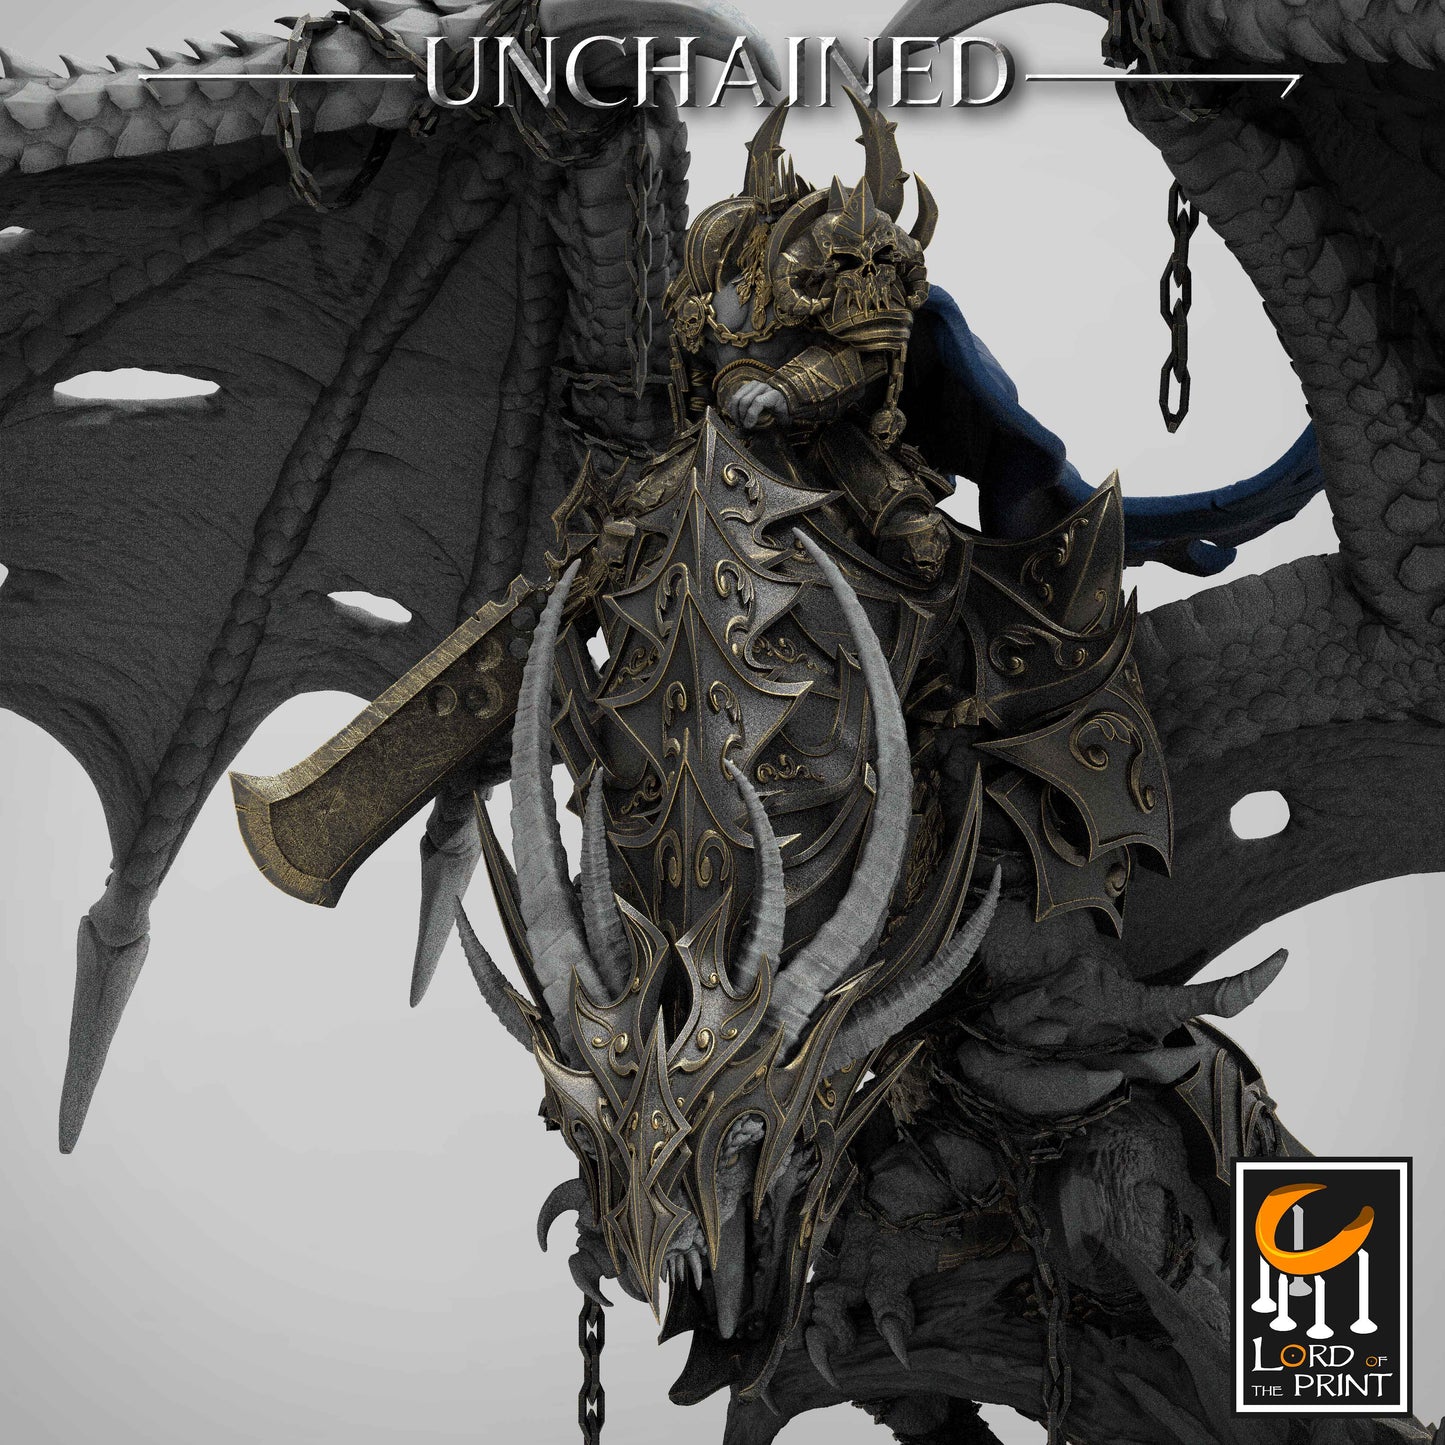 Unchained Dragon- UNCHAINED ARMY